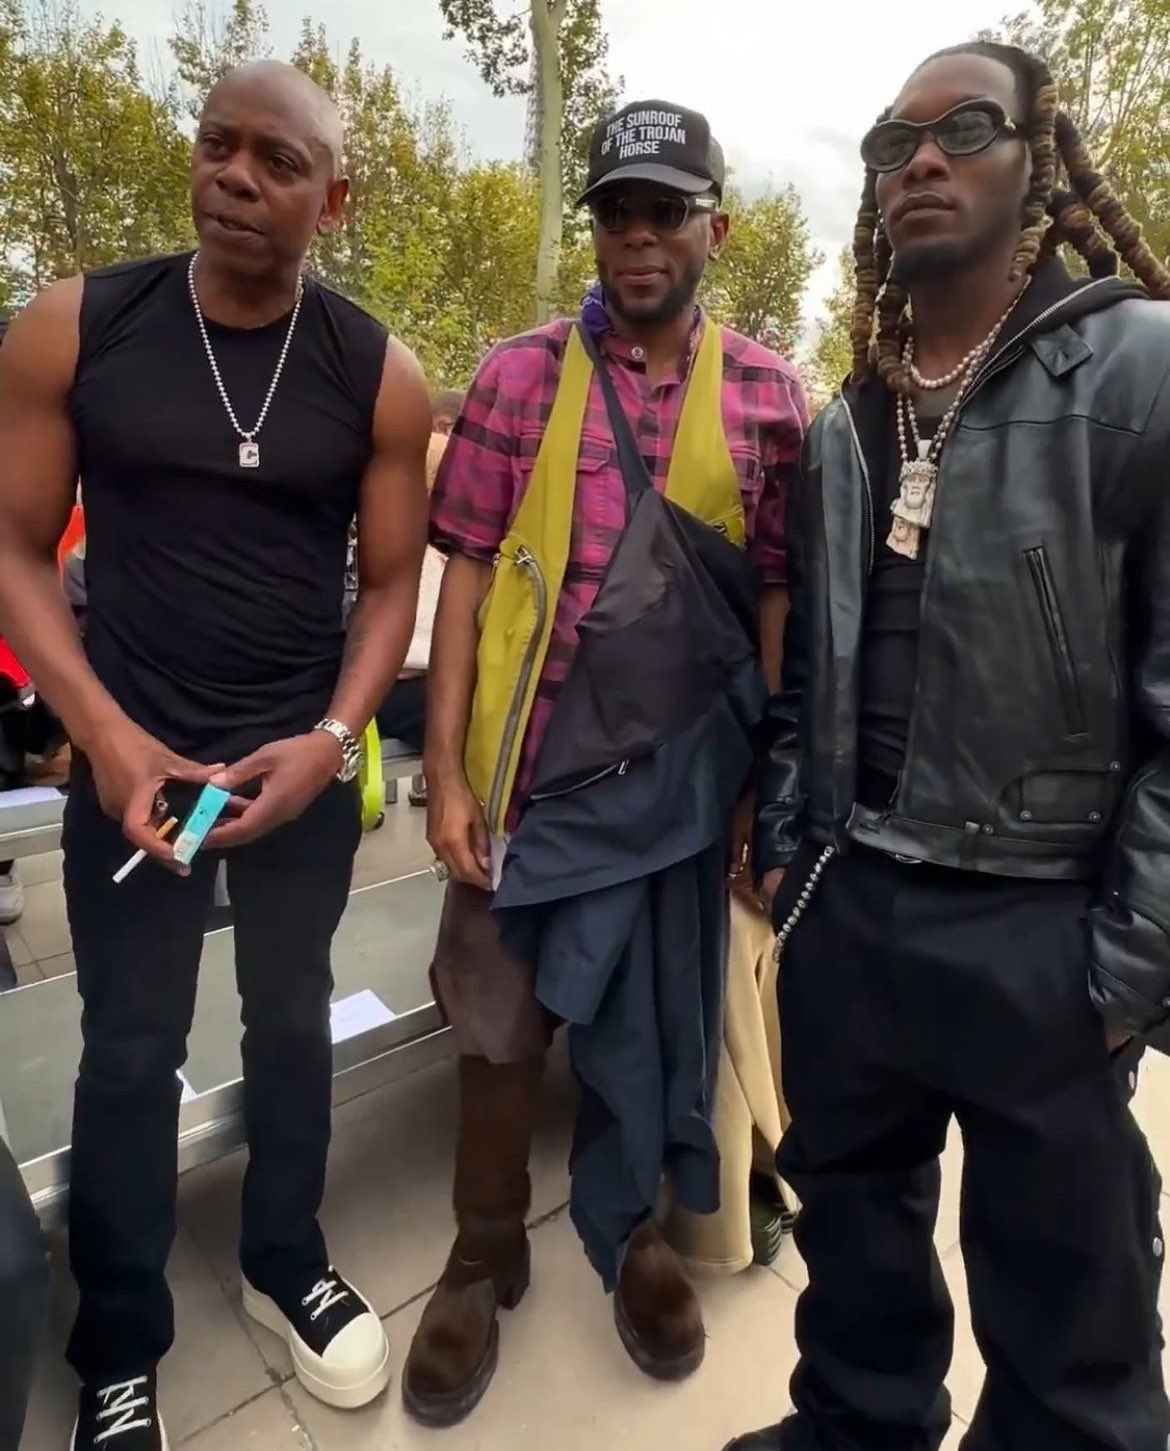 Wave Check🌊 on X: Offset at the Rick Owens Fashion Show with Dave  Chappelle & Yasiin Bey aka Mos Def 🔥  / X